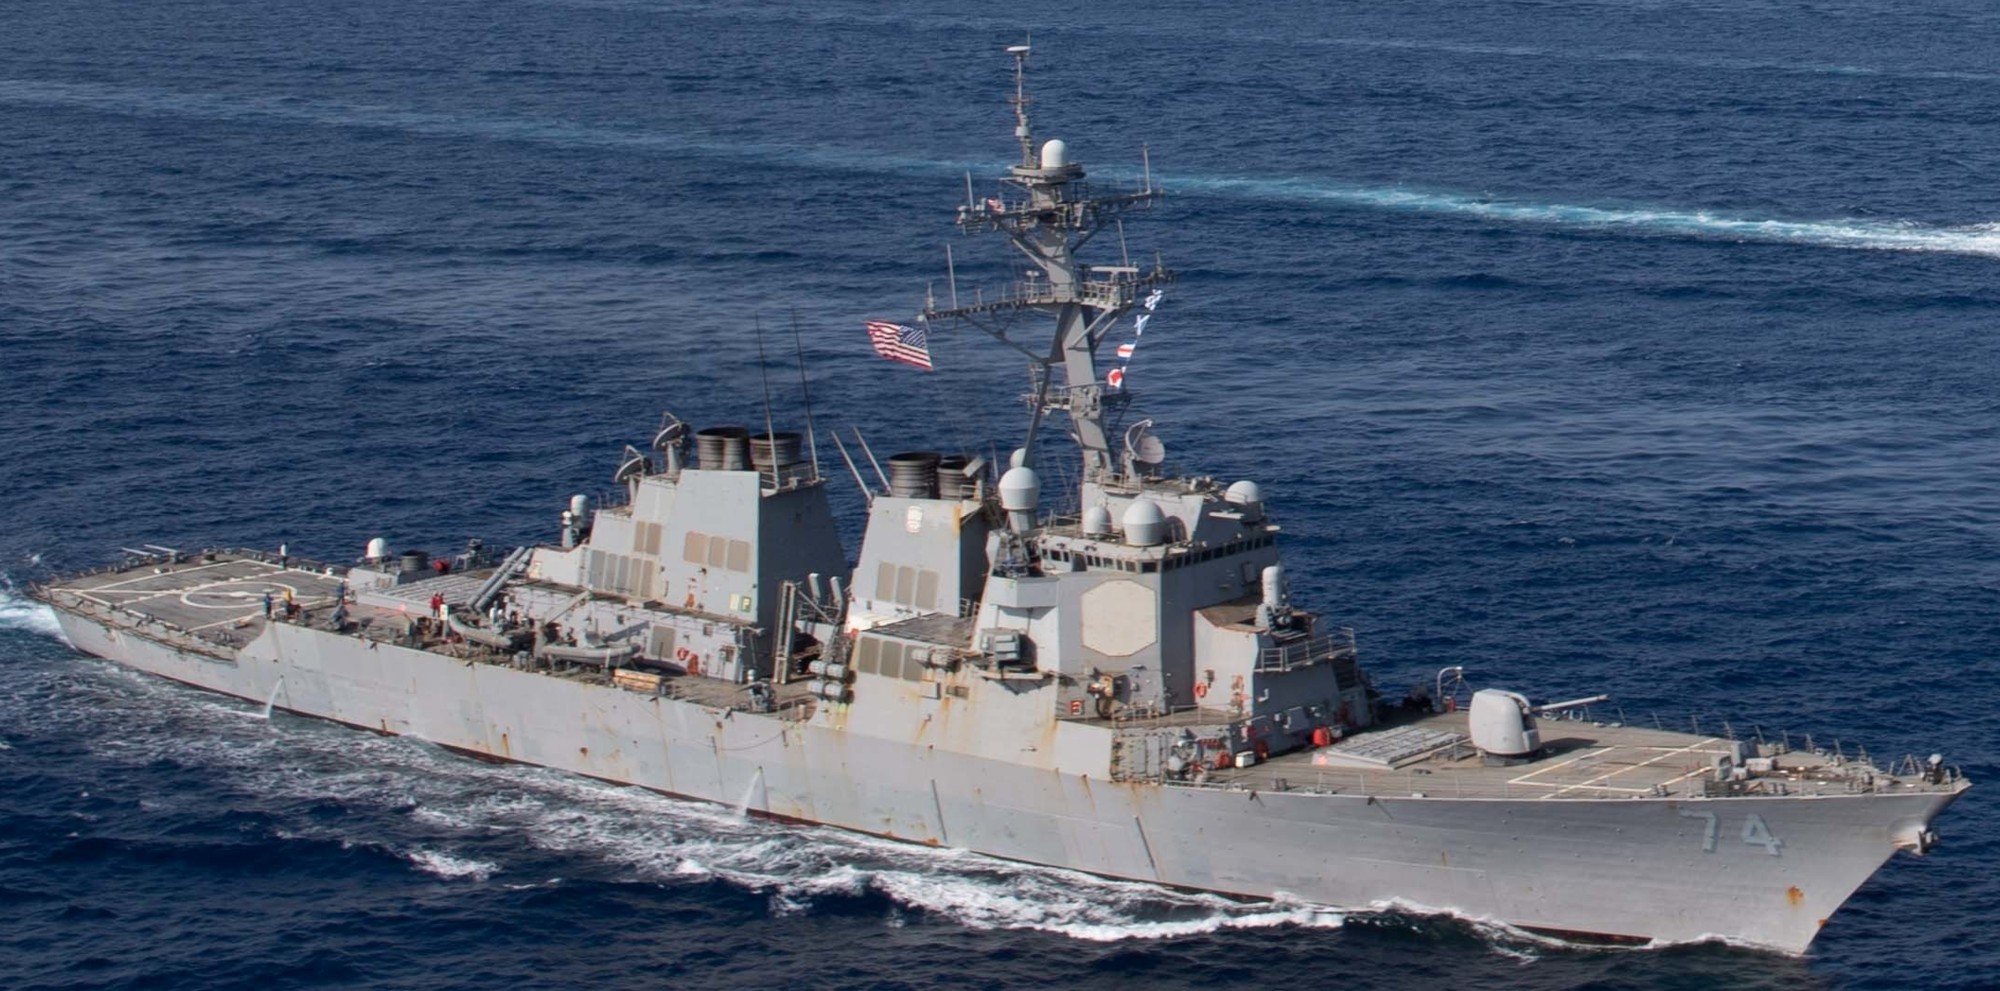 ddg-74 uss mcfaul guided missile destroyer arleigh burke class aegis us navy red sea 94